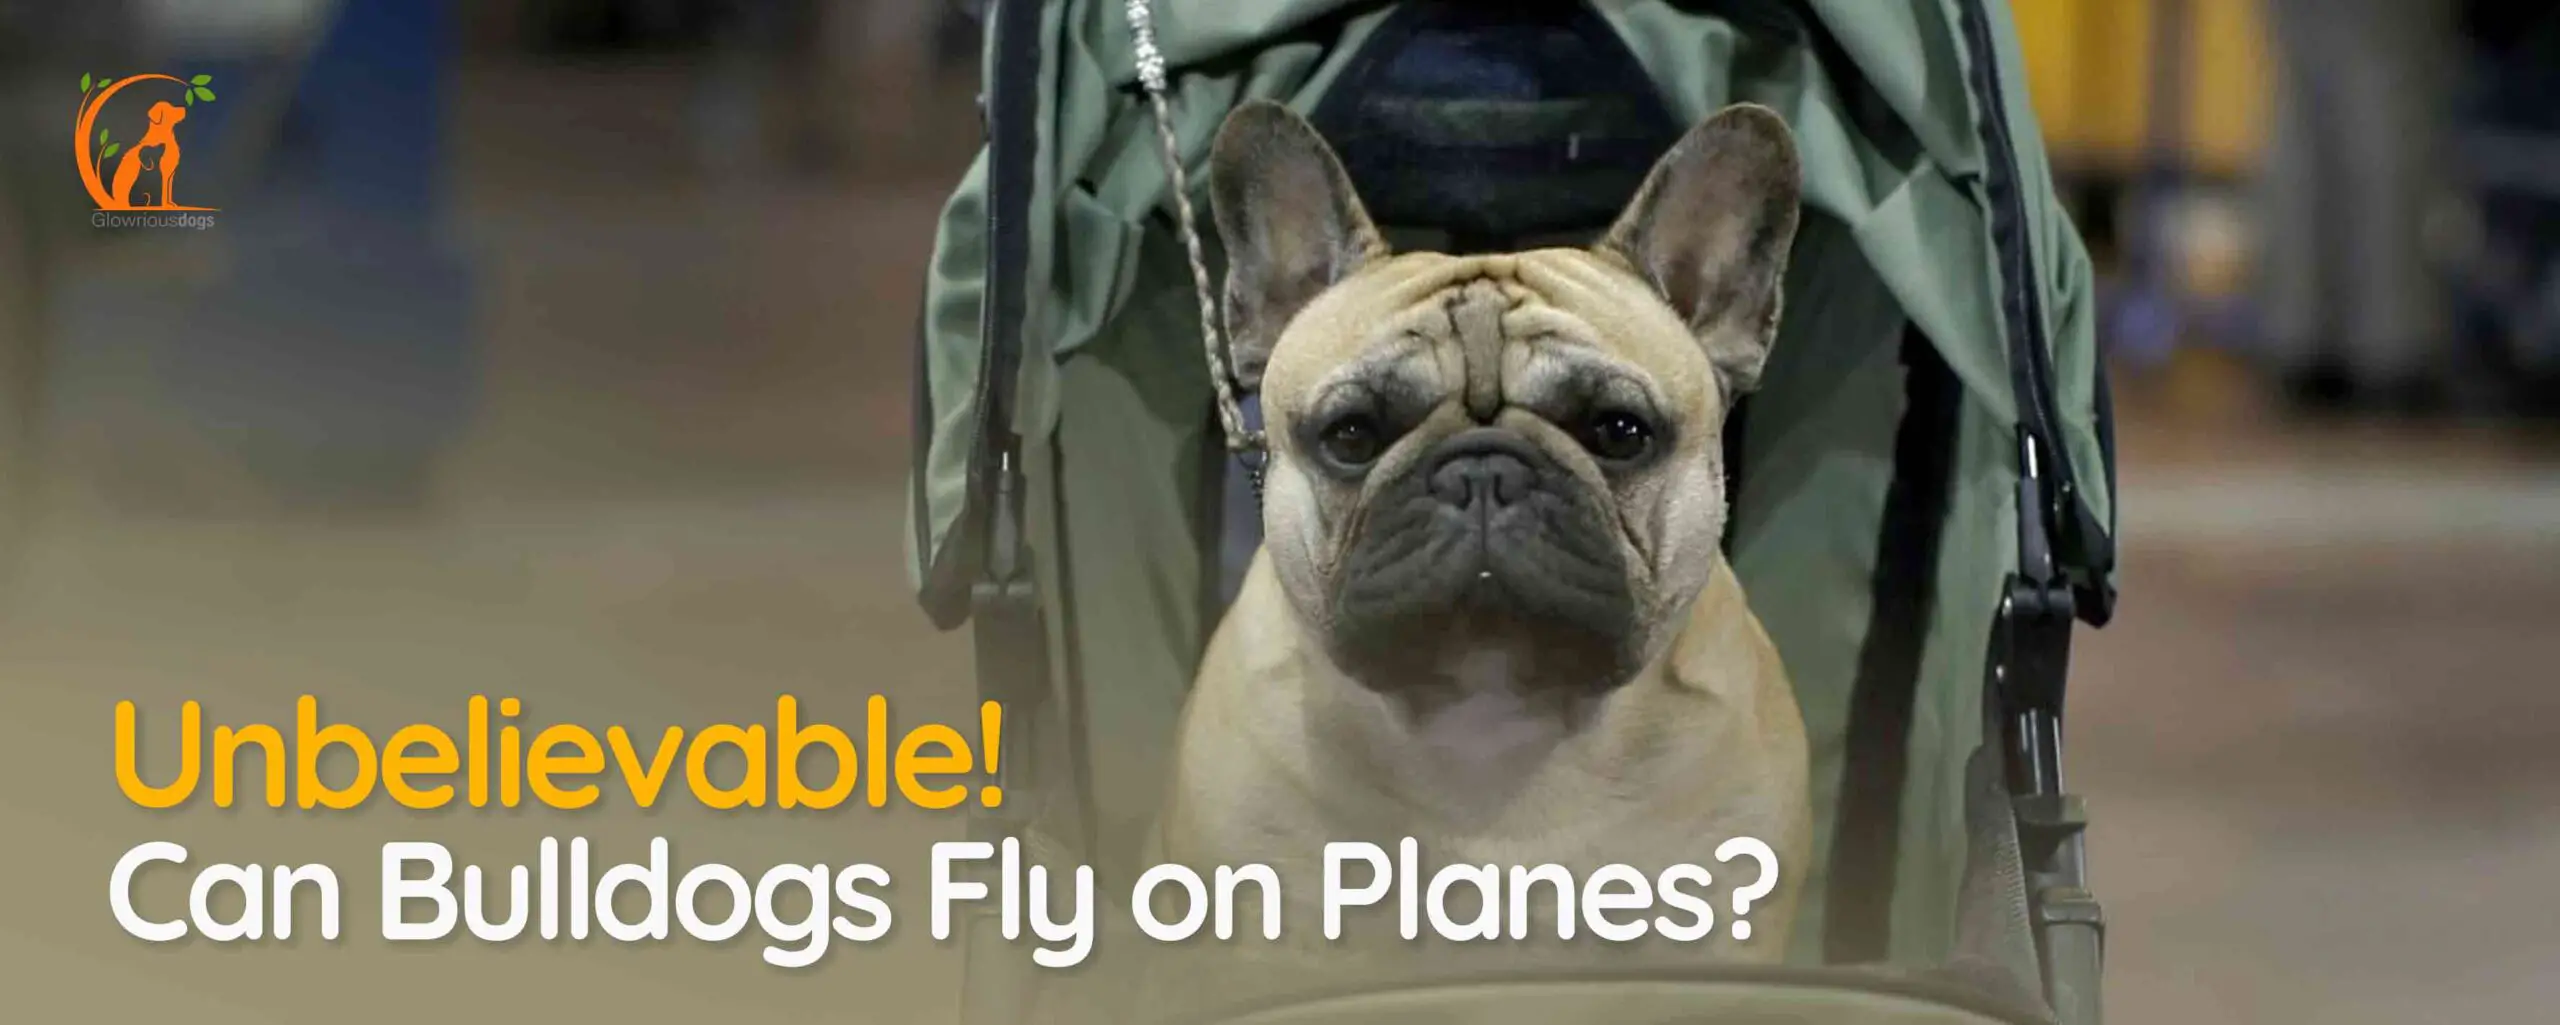 Unbelievable! Can Bulldogs Fly on Planes?